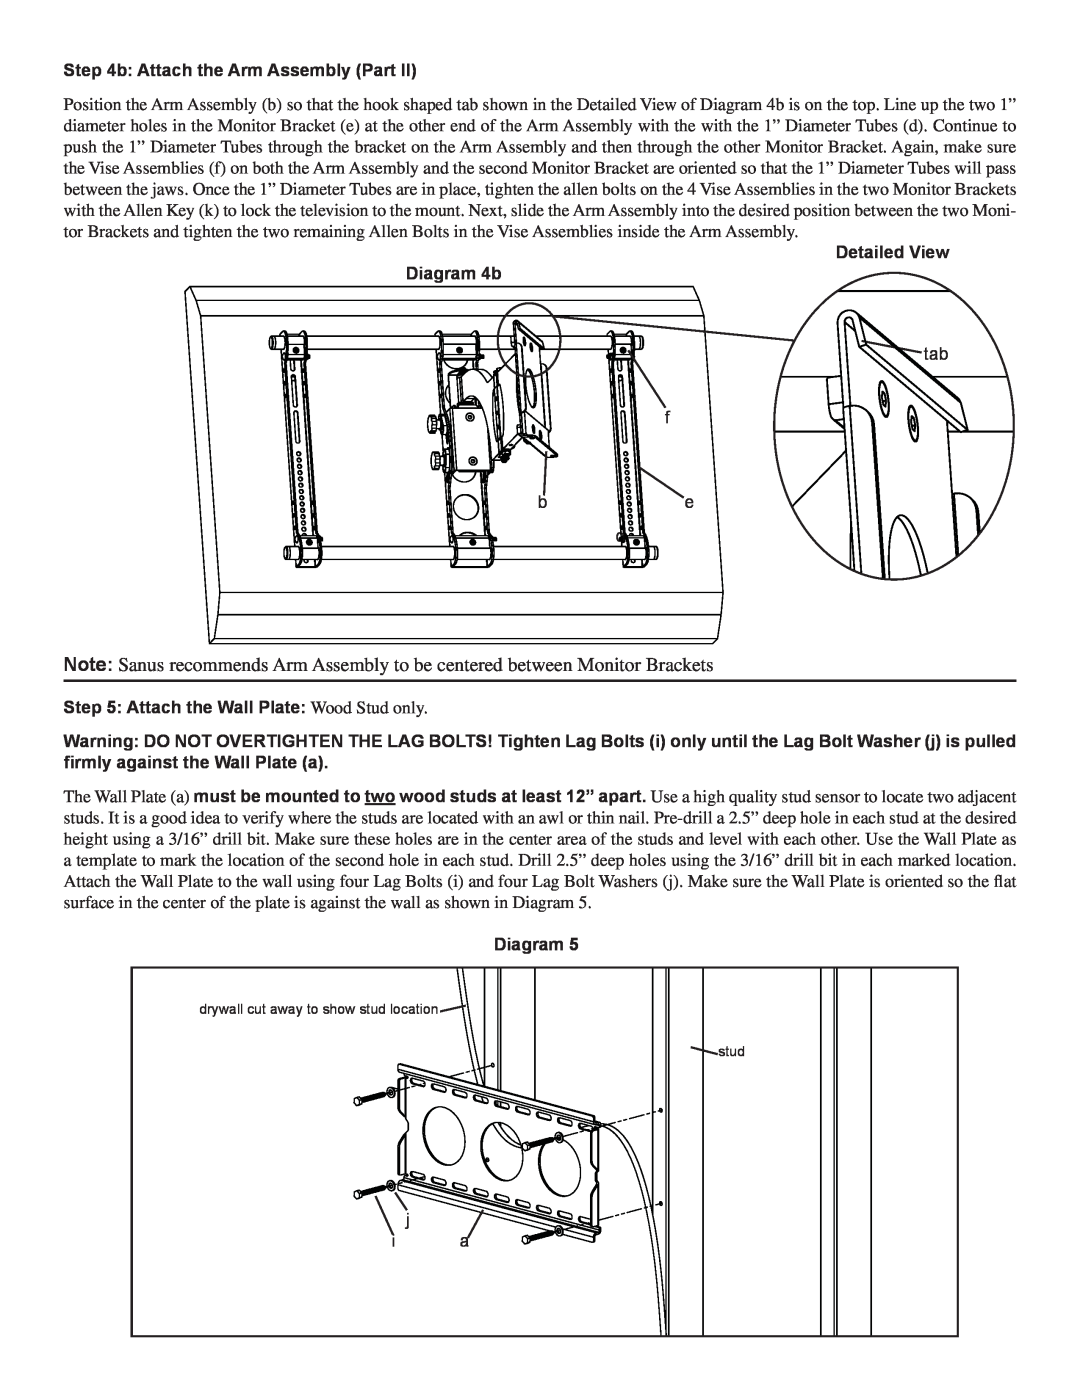 Sanus Systems VMAA18 manual b: Attach the Arm Assembly Part, Detailed View Diagram 4b, tab f be d, j i a 